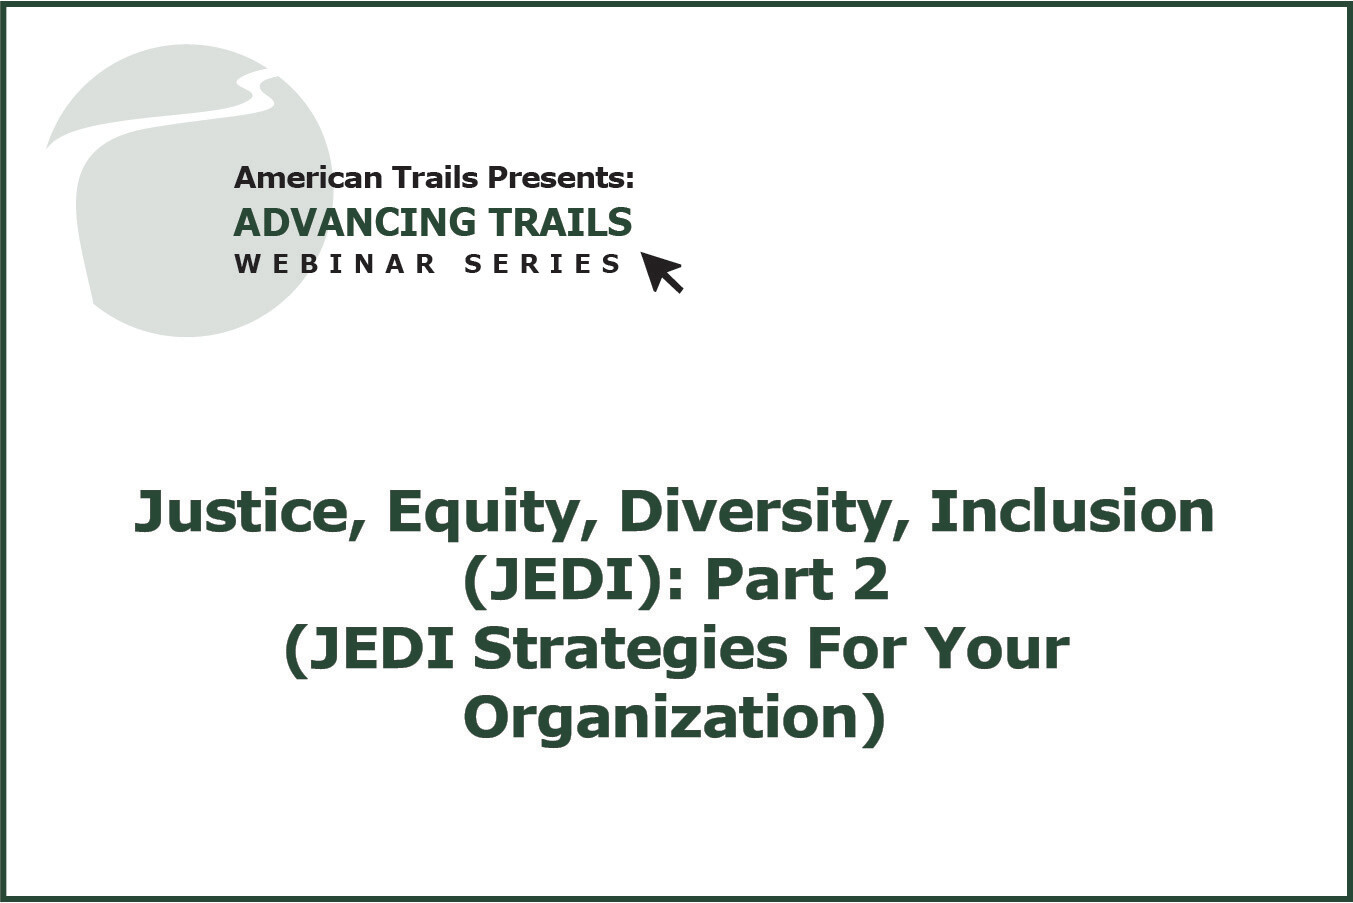 Justice, Equity, Diversity, and Inclusion (JEDI) (Part 2 of 2) (RECORDING)